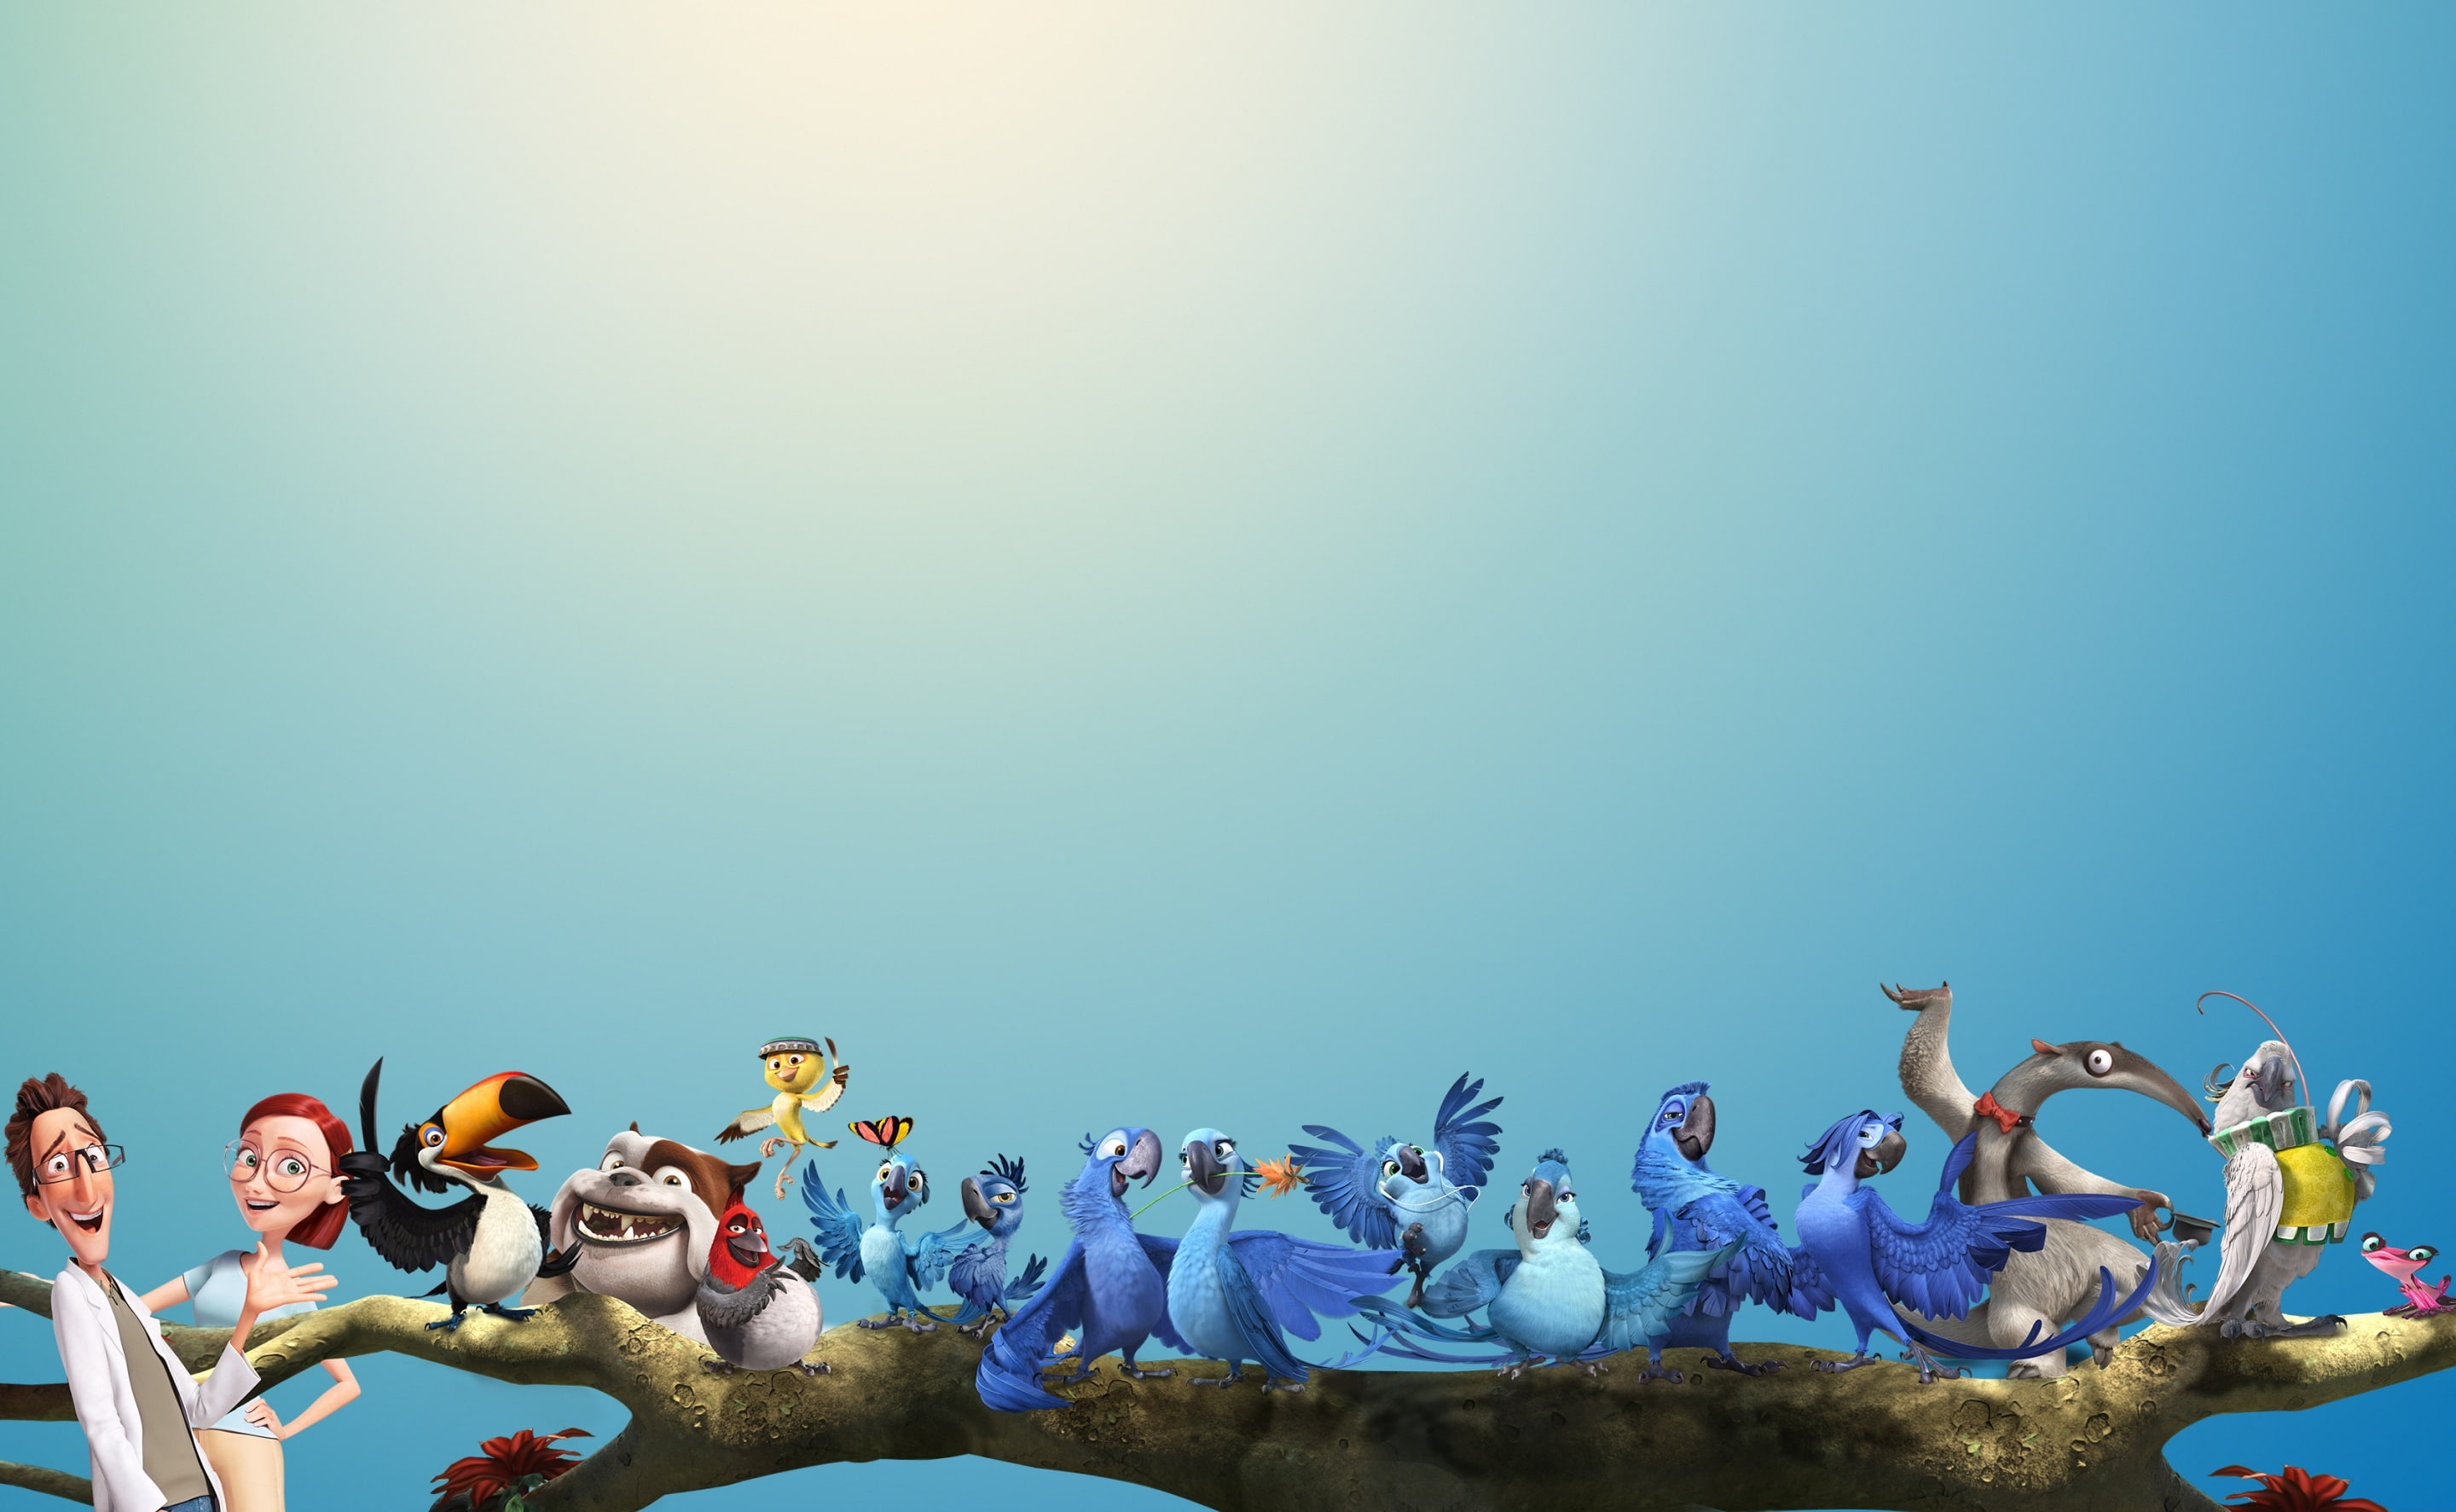 Rio 2 All Characters, Rio 2 movie wallpaper, Cartoons, Others